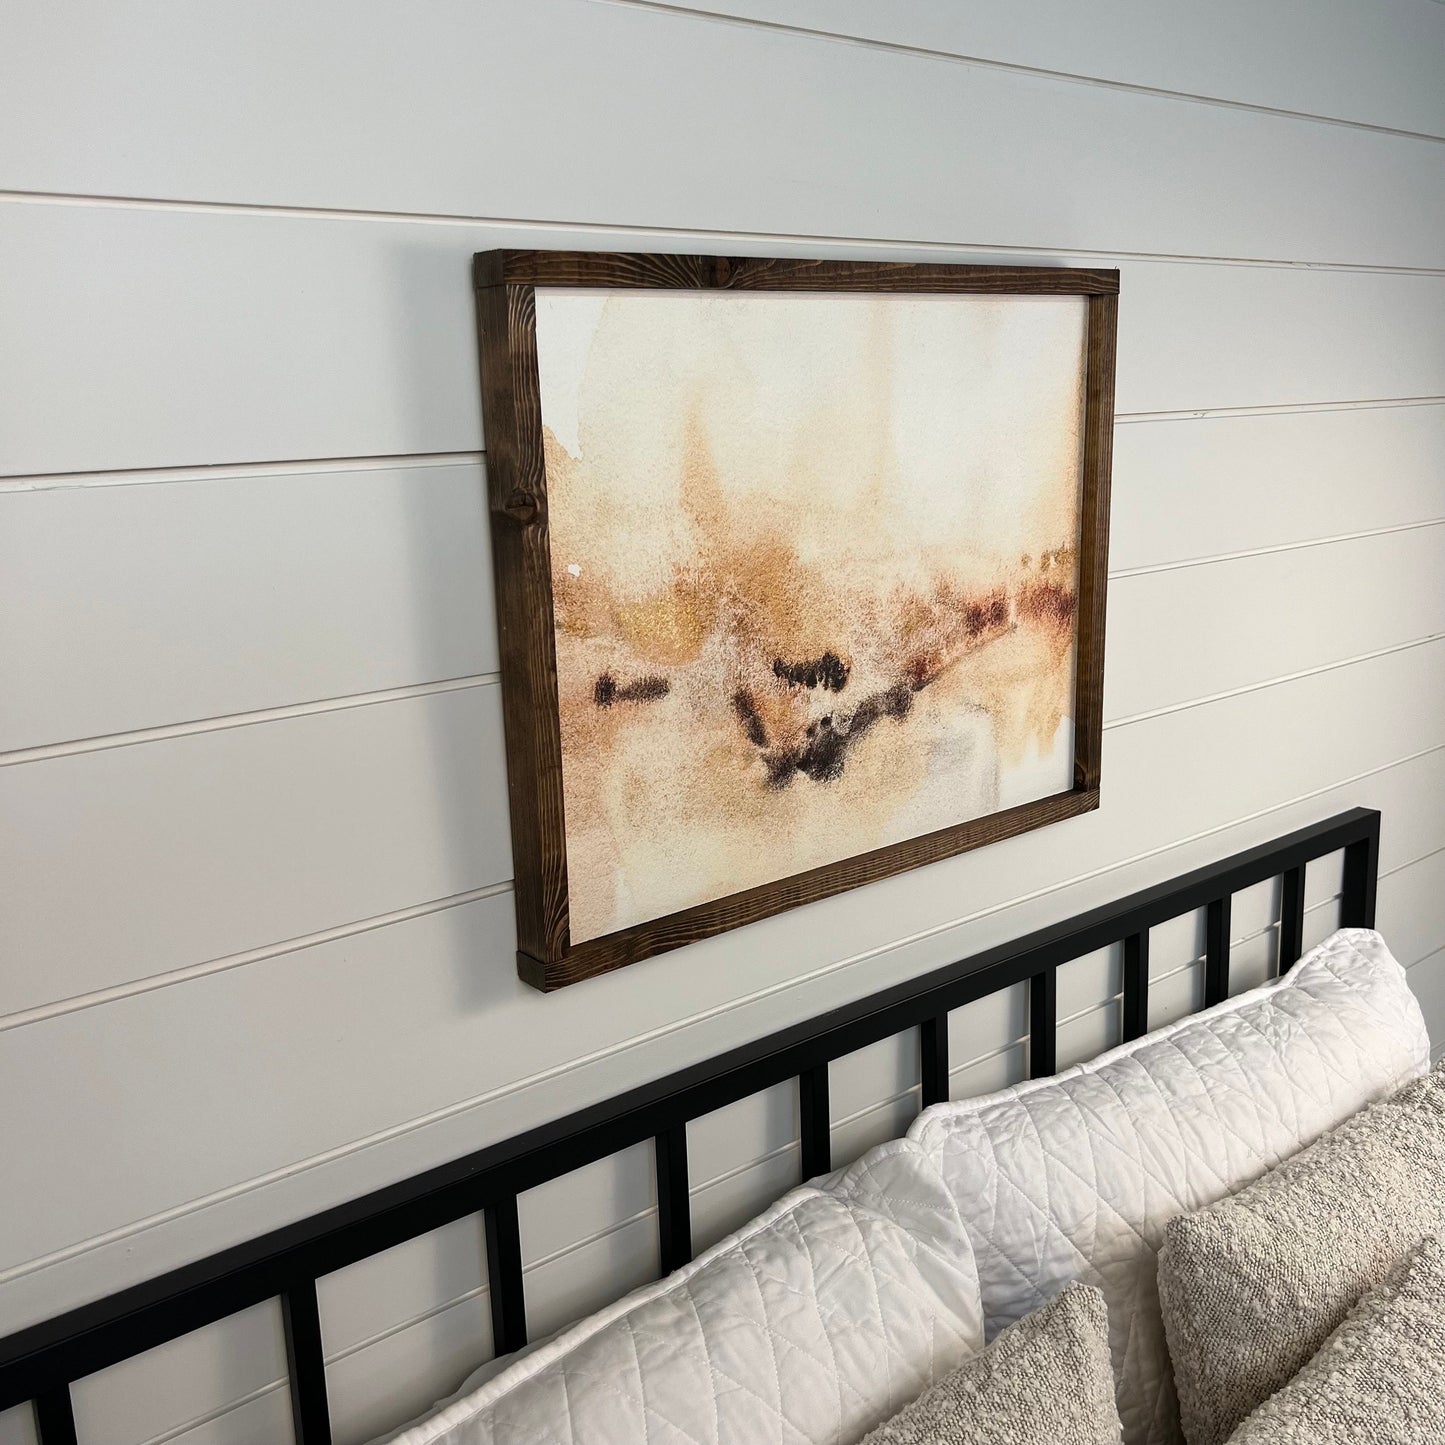 landscape art * above the bed / couch living room decor [FREE SHIPPING!]